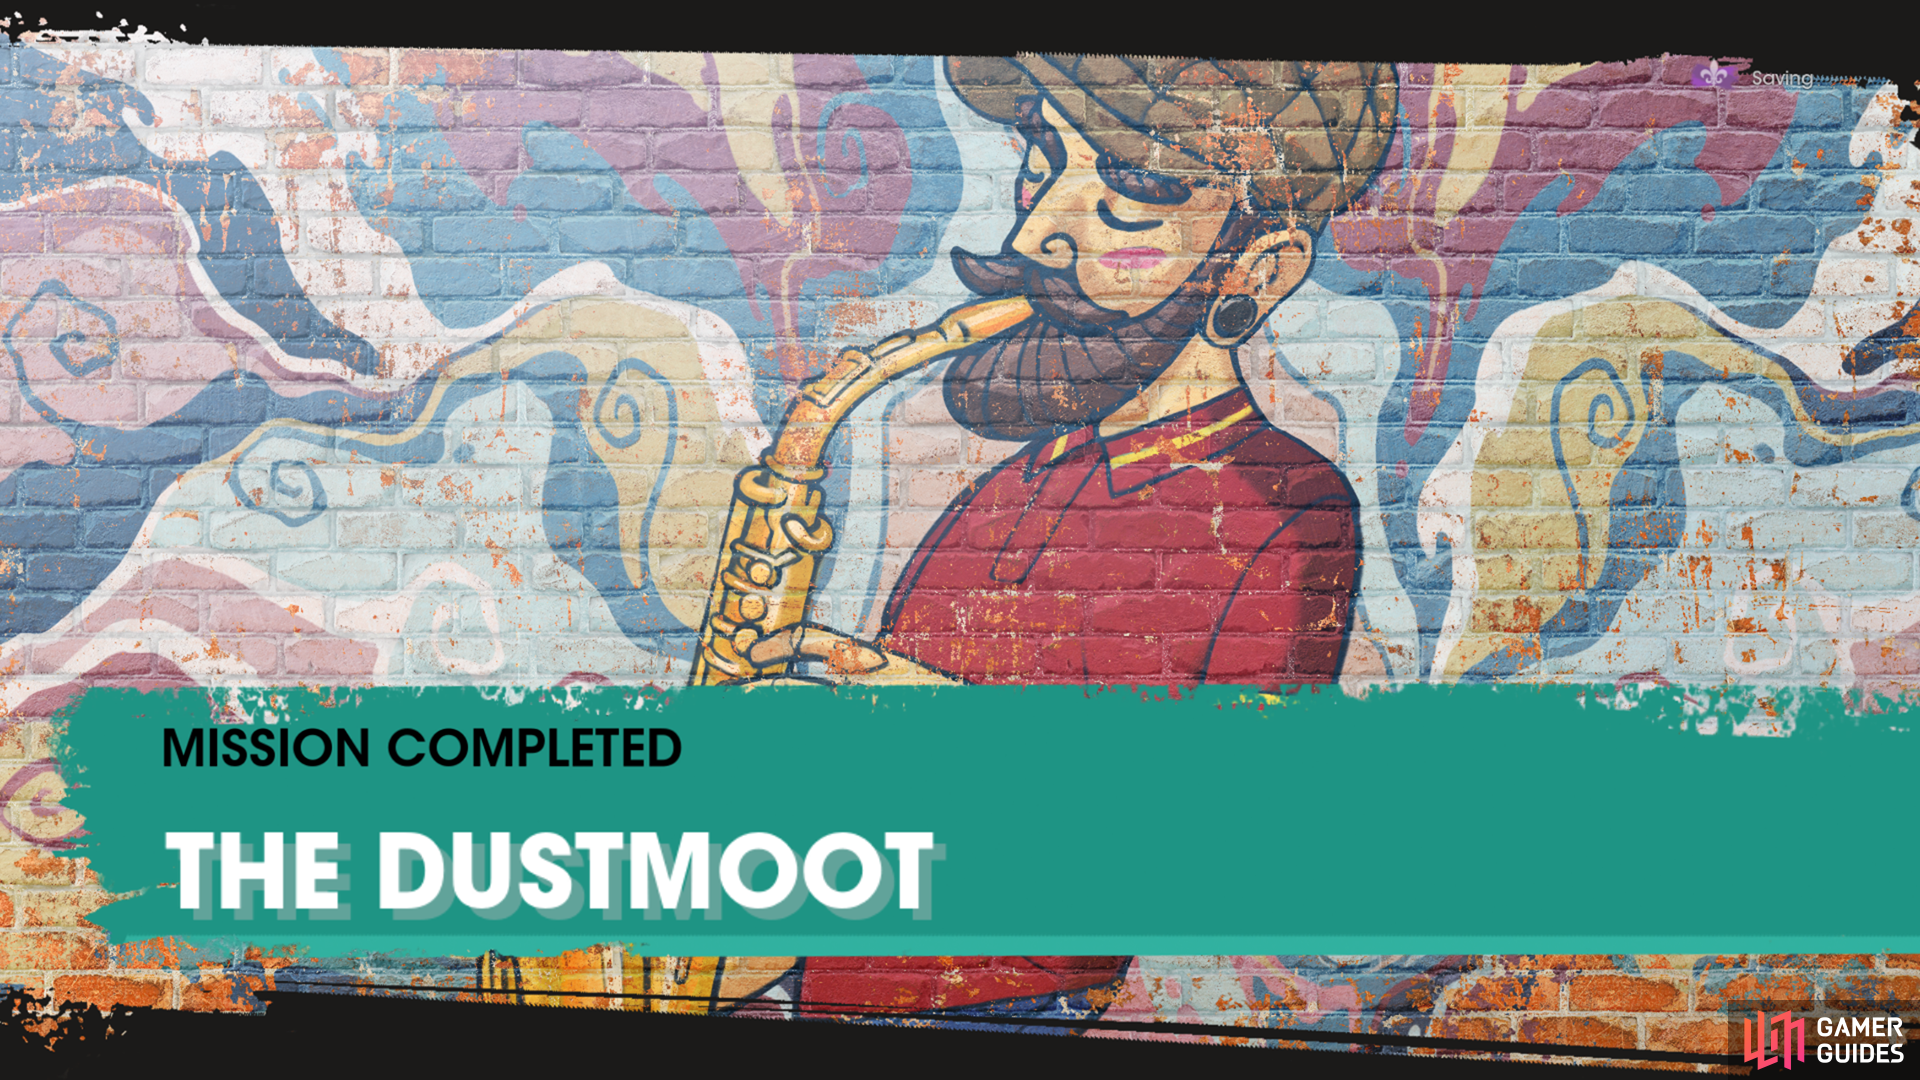 The Dustmoot is just the first of Saint Row's Dustlander missions. More can be unlocked.